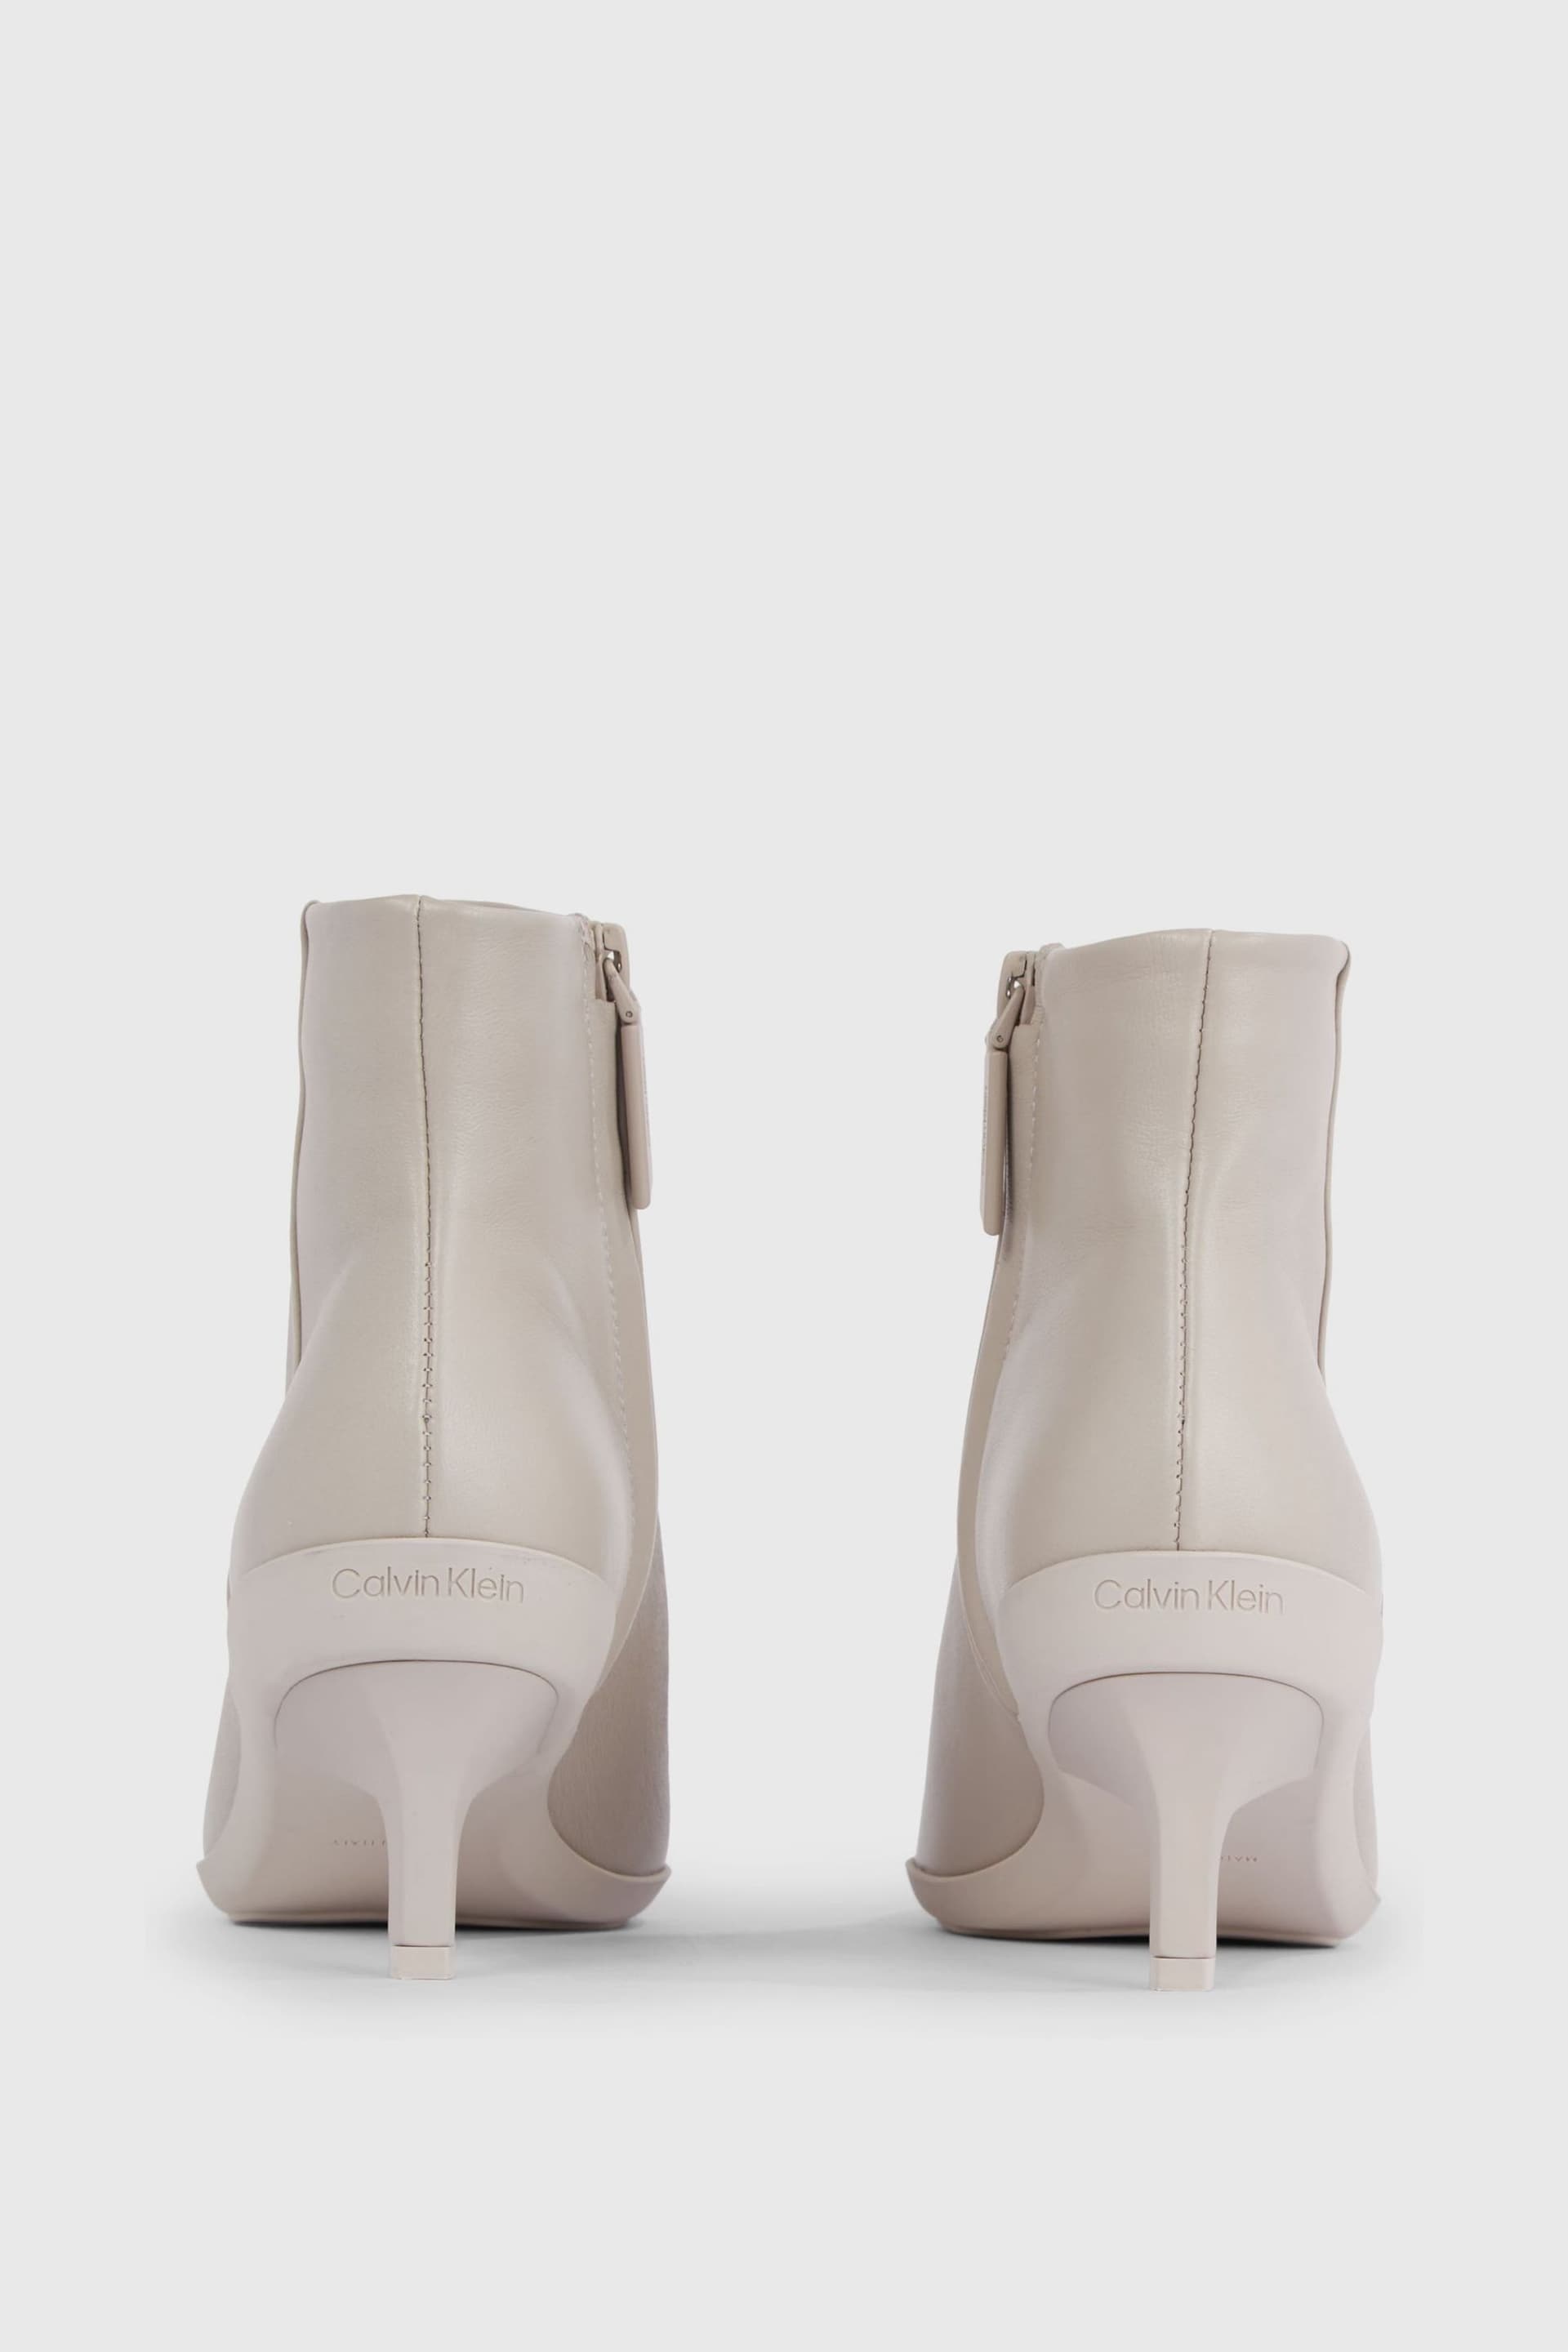 Calvin Klein Grey Wrapped Ankle Boots - Image 4 of 7